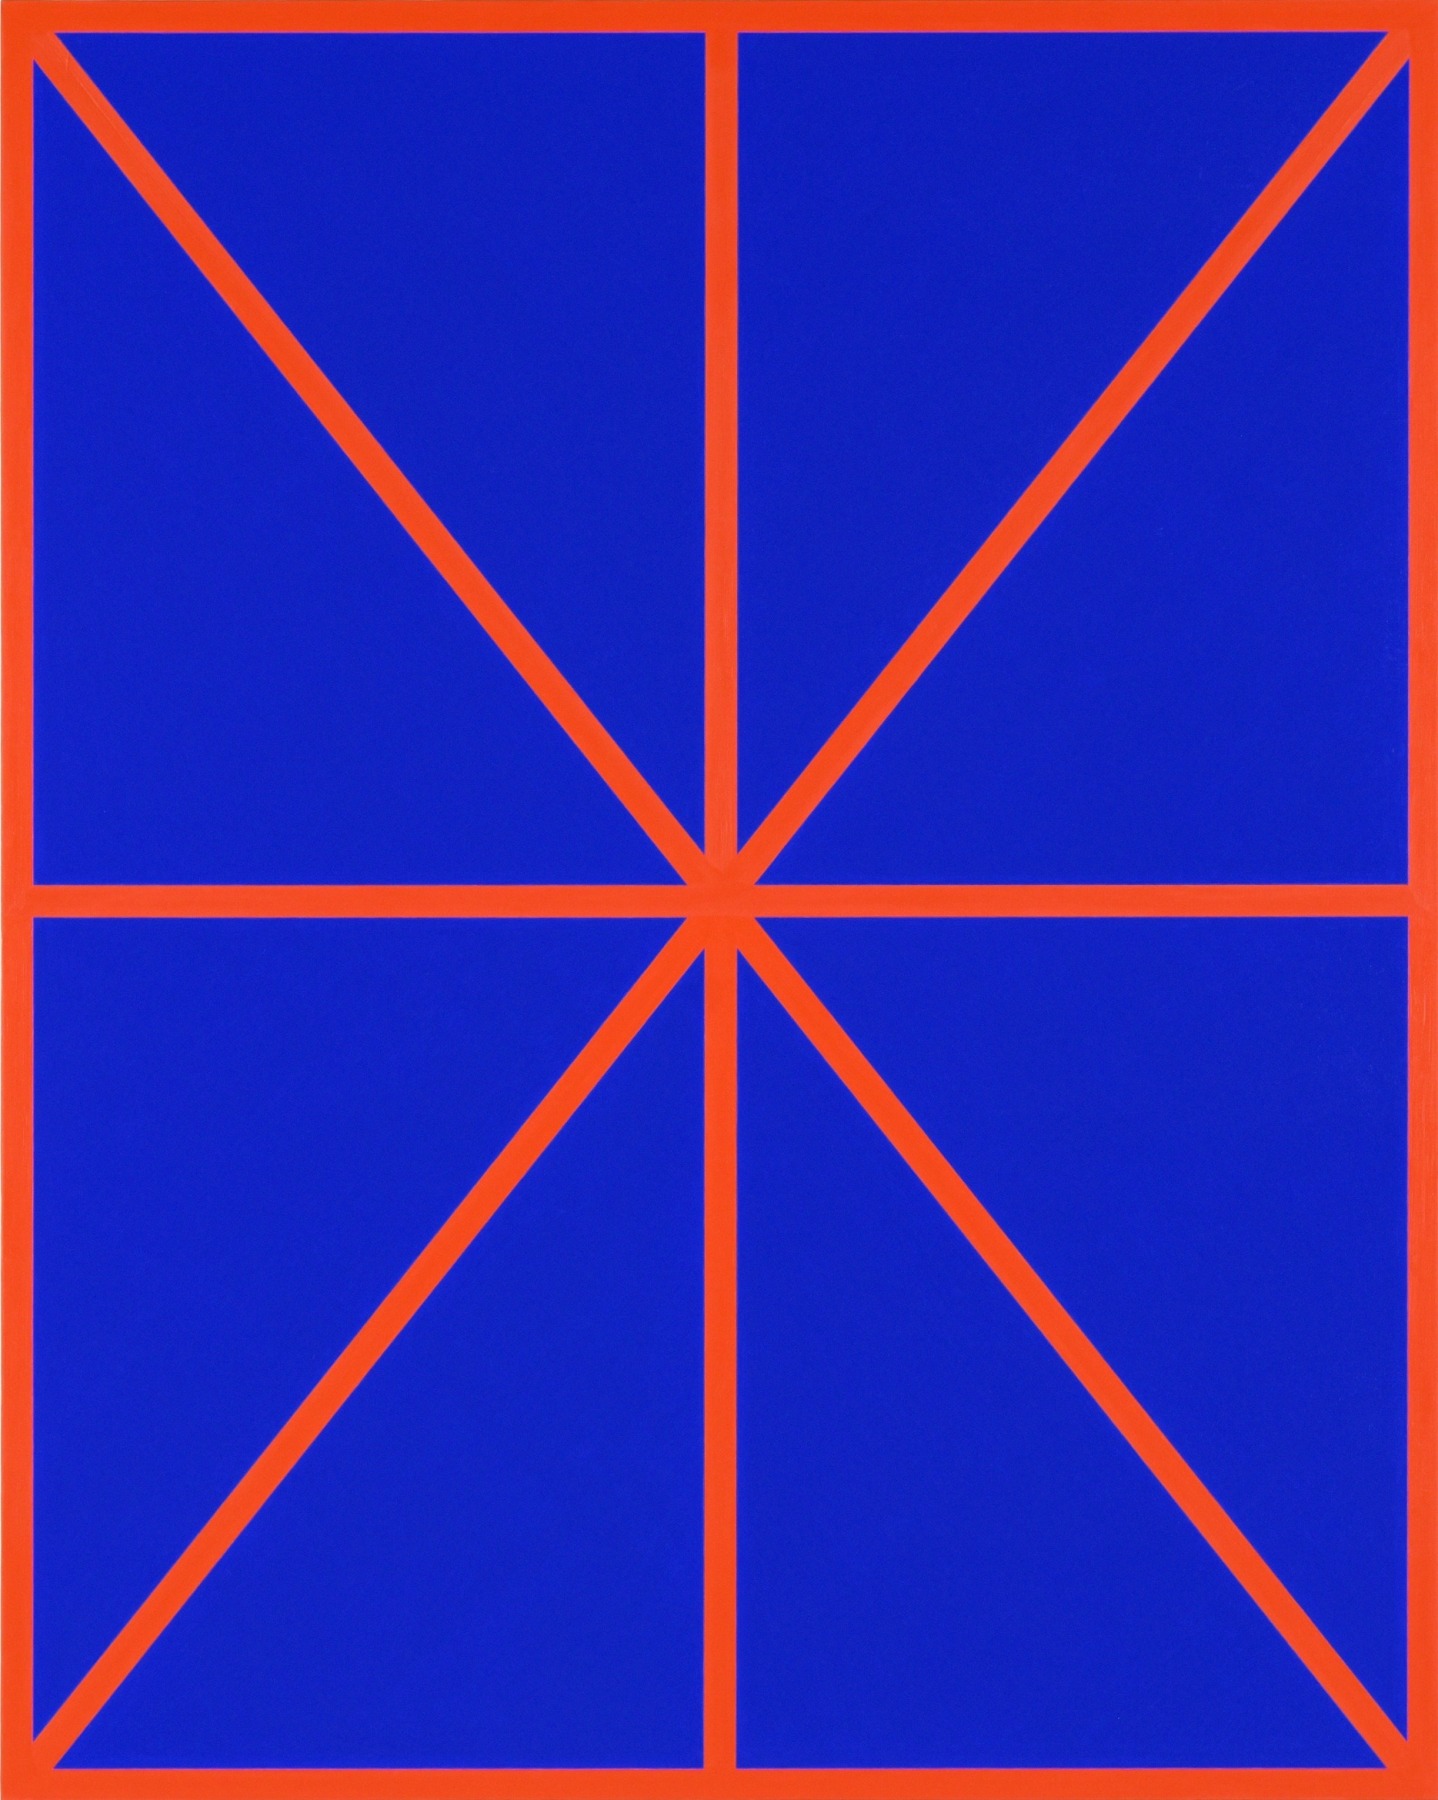 Cary Smith, Diagonals #1 (blue-red), 2017